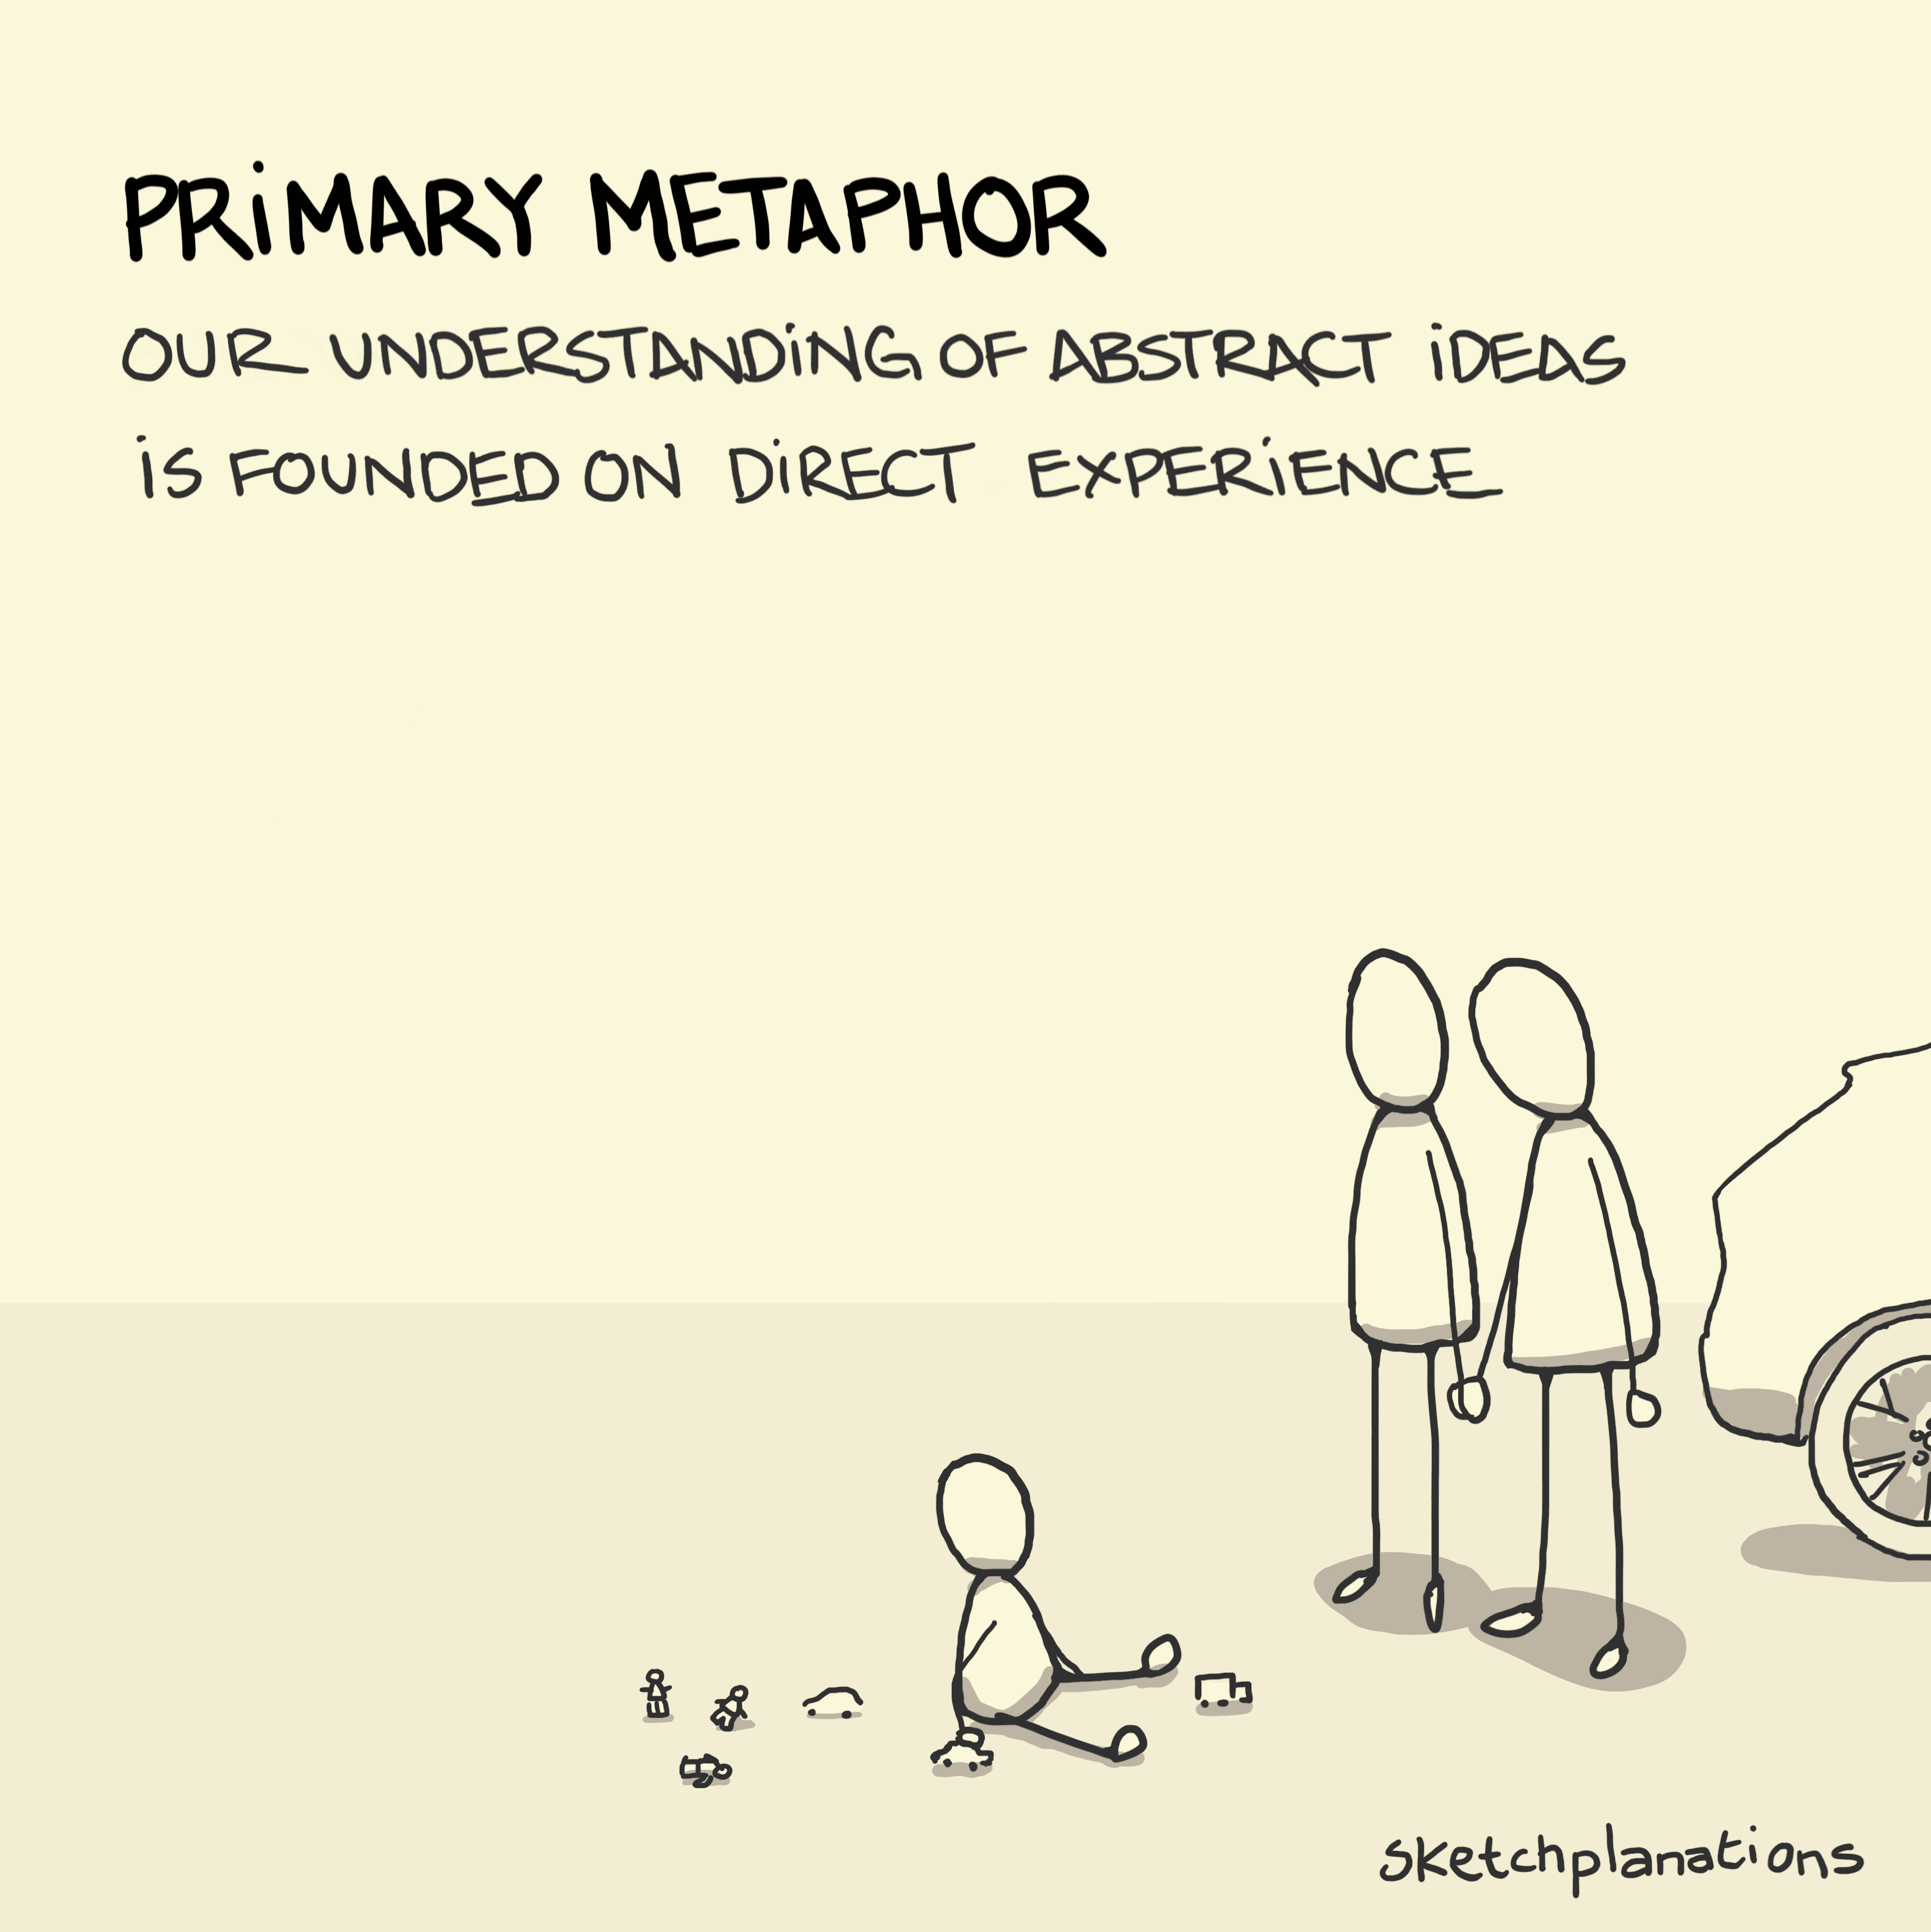 Primary metaphor examples: Important Is Big with parents and a small child, Knowing Is Seeing looking in a box, and Affection Is Warmth with a parent hugging a baby